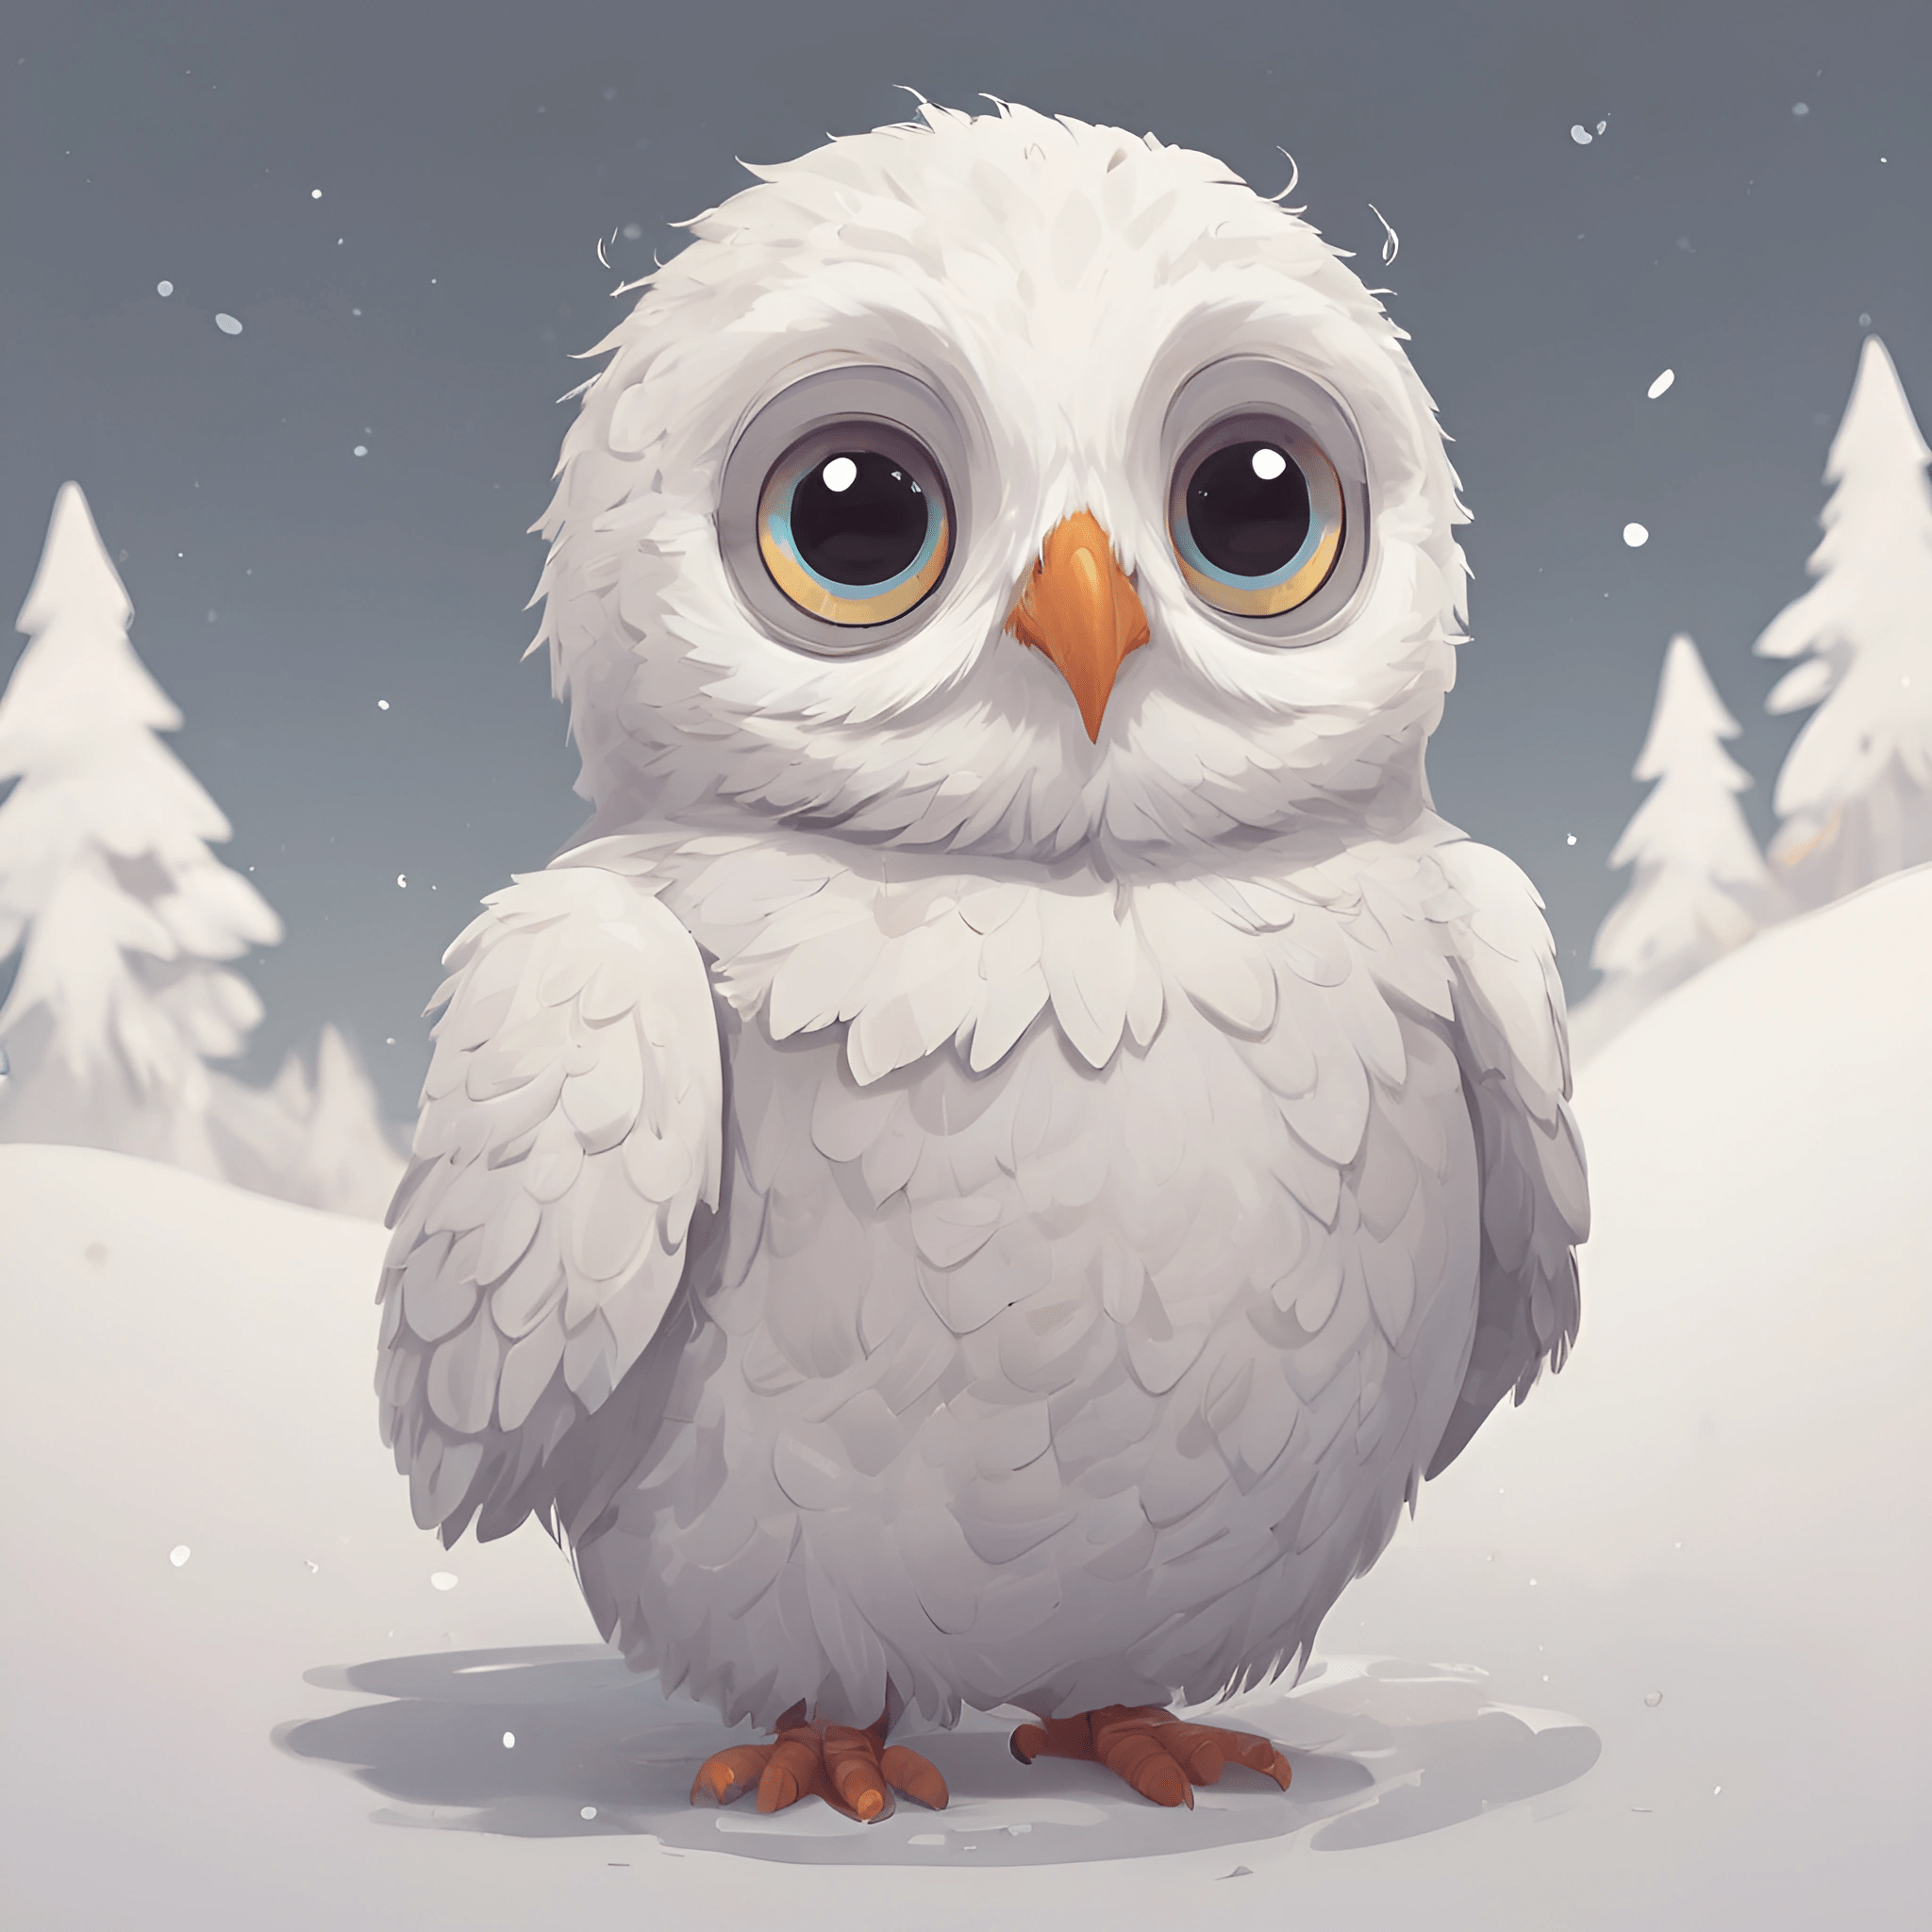 a white owl with big eyes standing in the snow